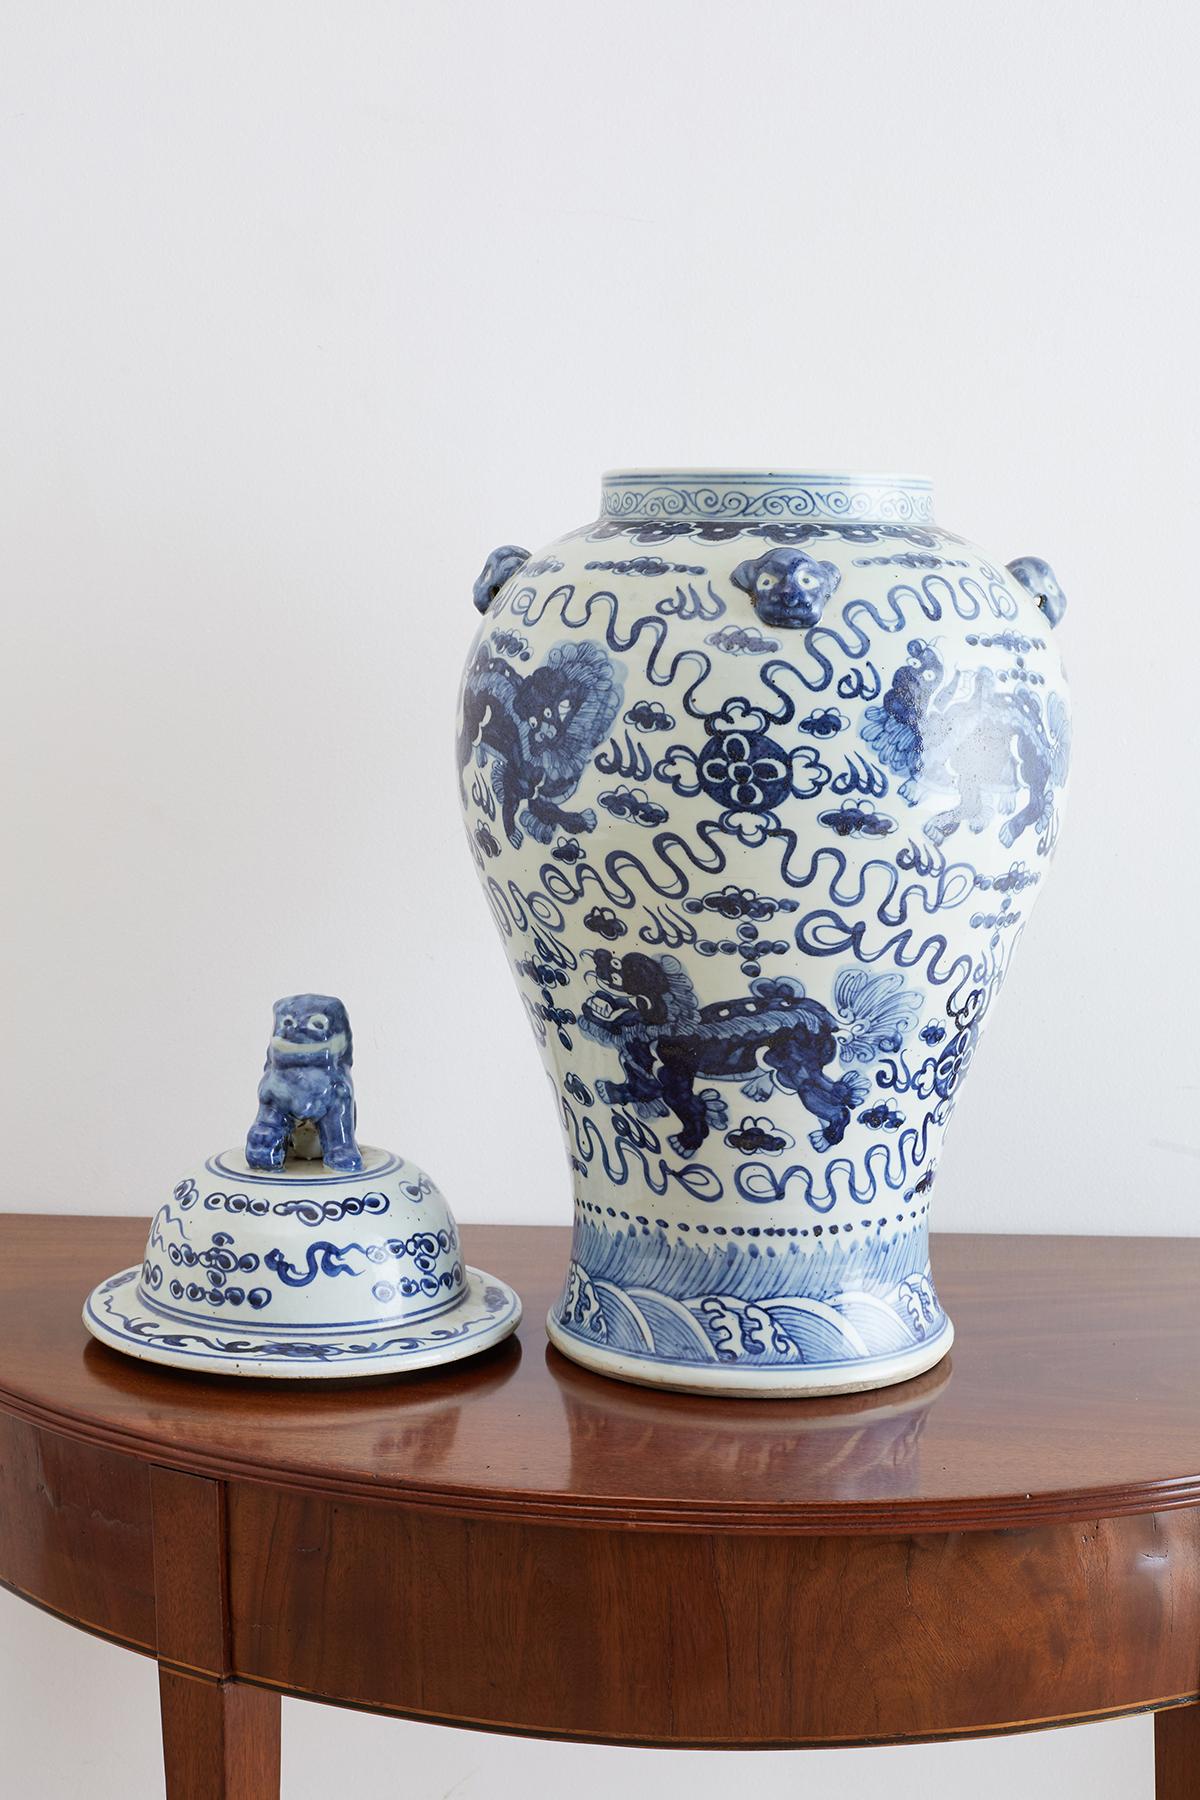 Monumental Chinese blue and white porcelain ginger jar or temple jar. Features hand-painted foo dogs or lions amid the clouds and fire with whimsical designs around them. The beautifully tapered form has mythical beast heads decorating the